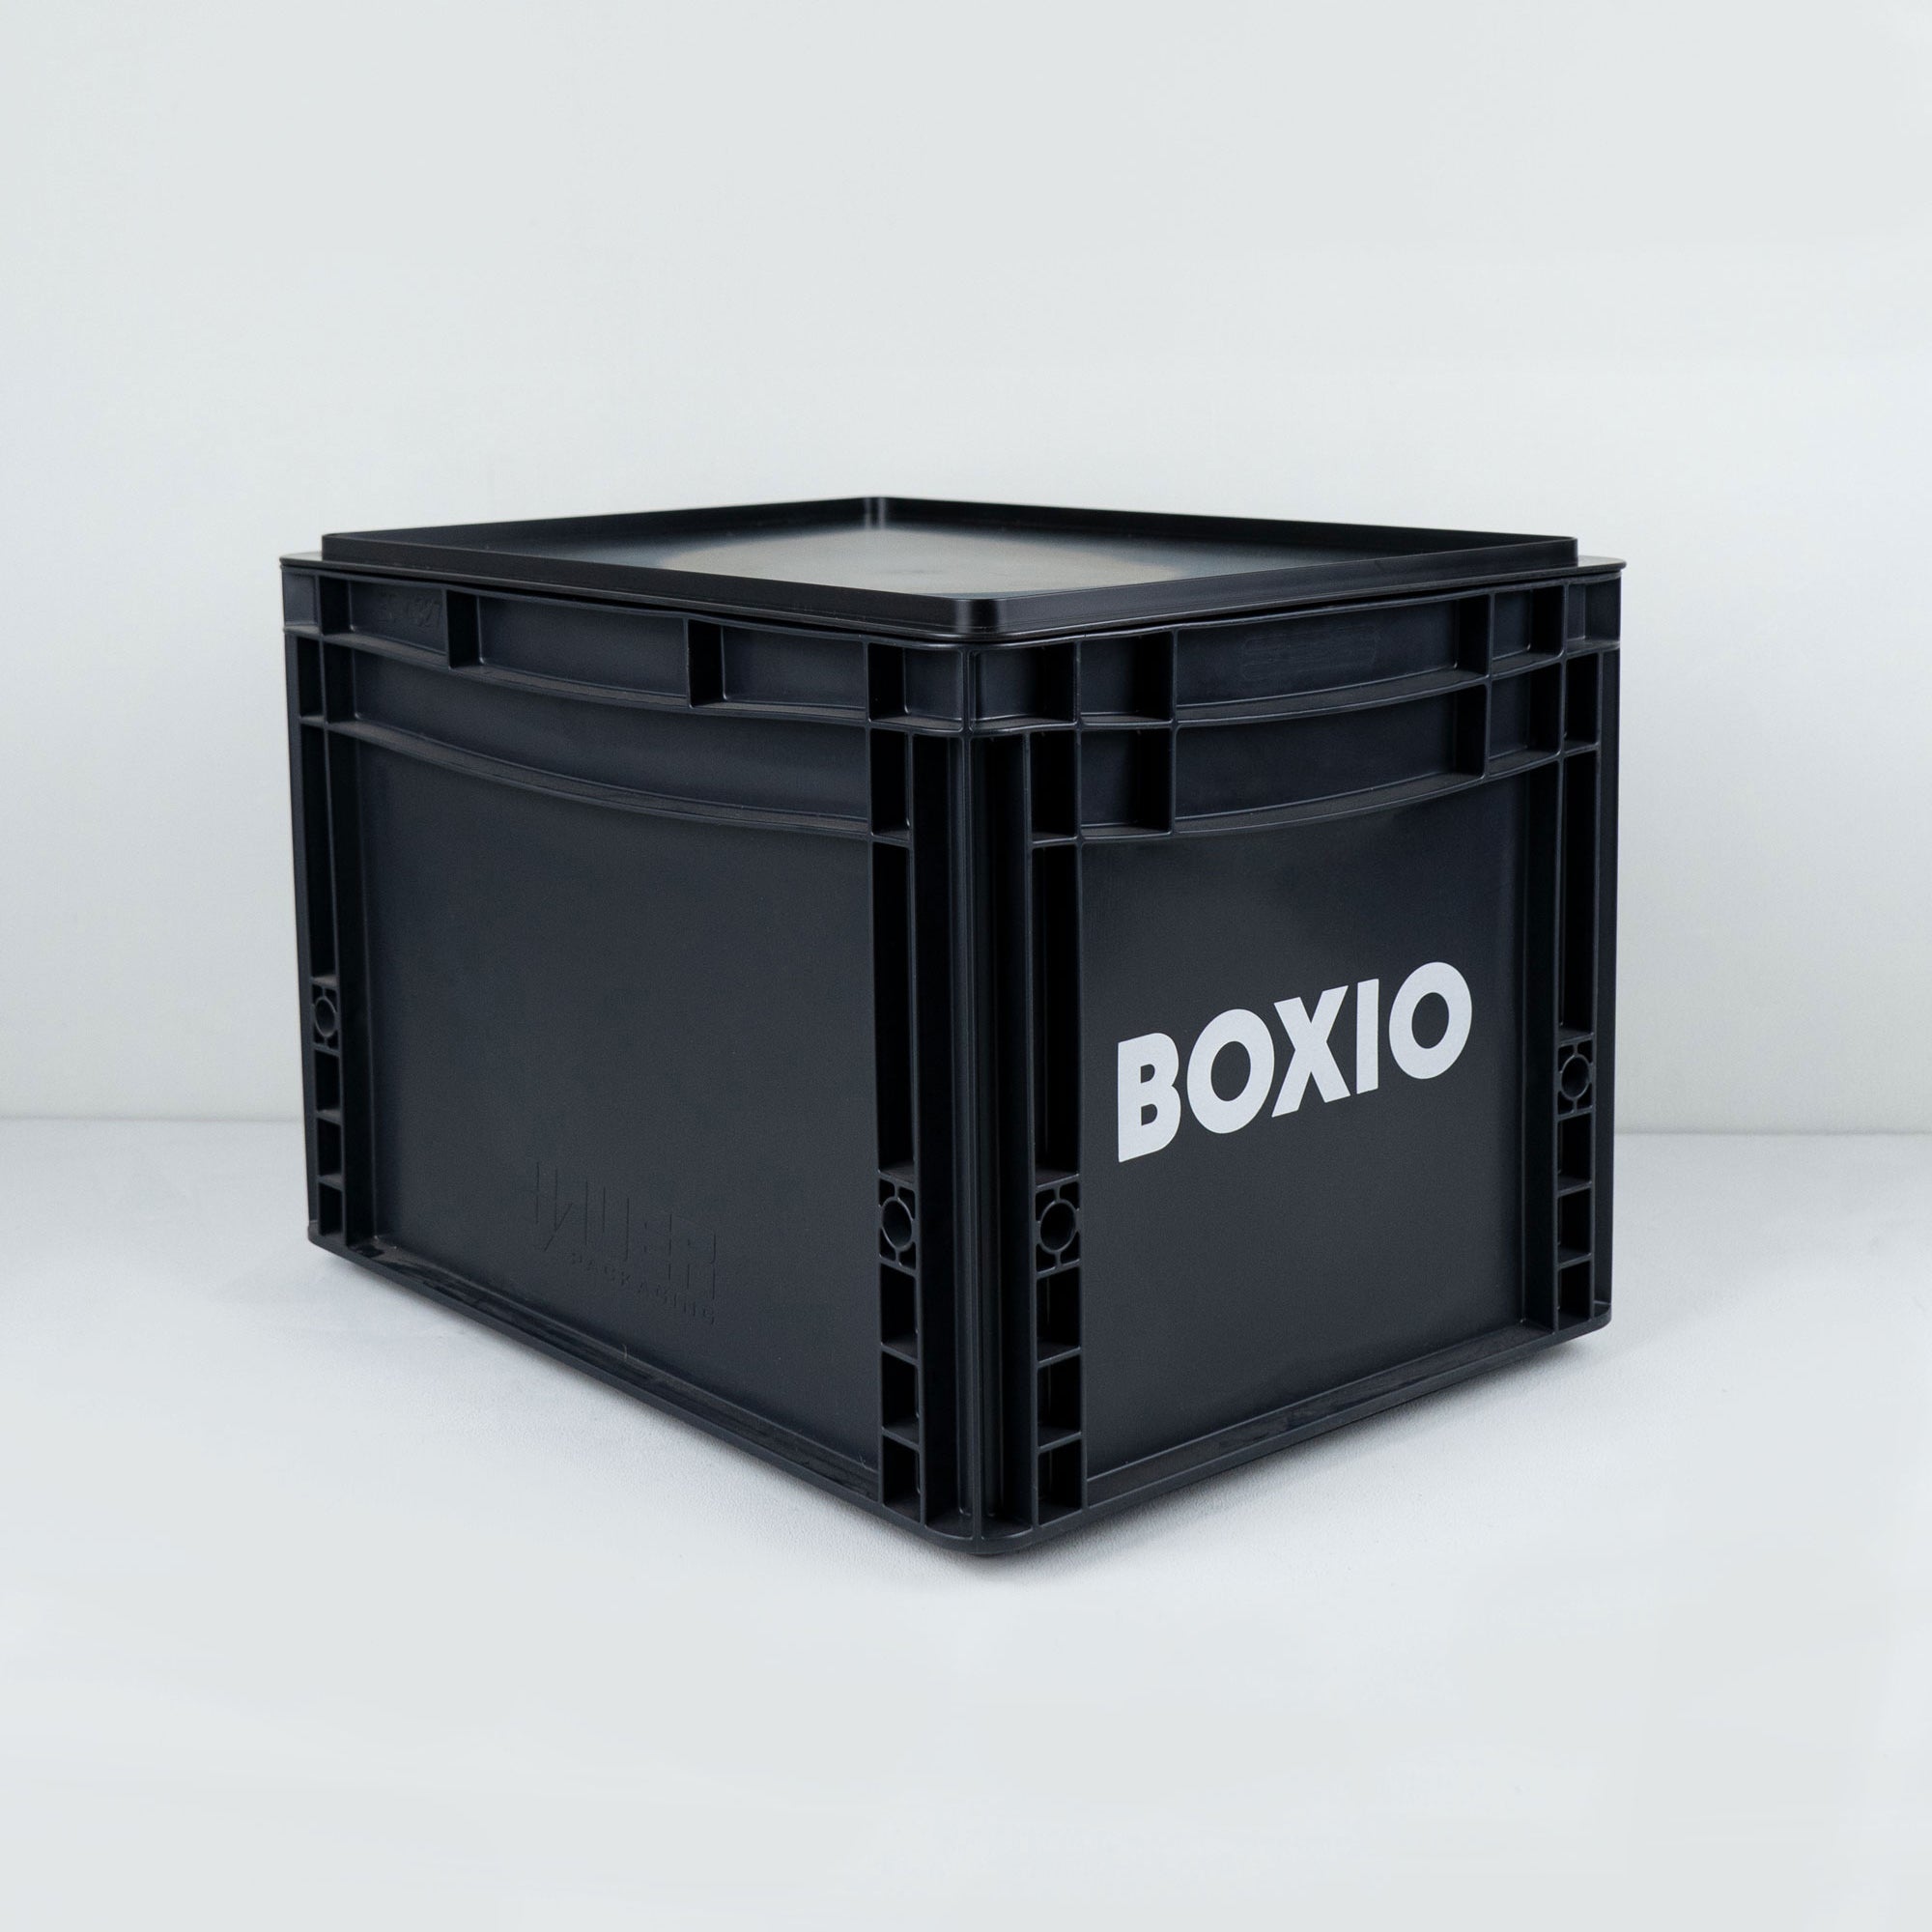 BOXIO TOILET - Buy the inexpensive separation toilet in compact Eurobox  format